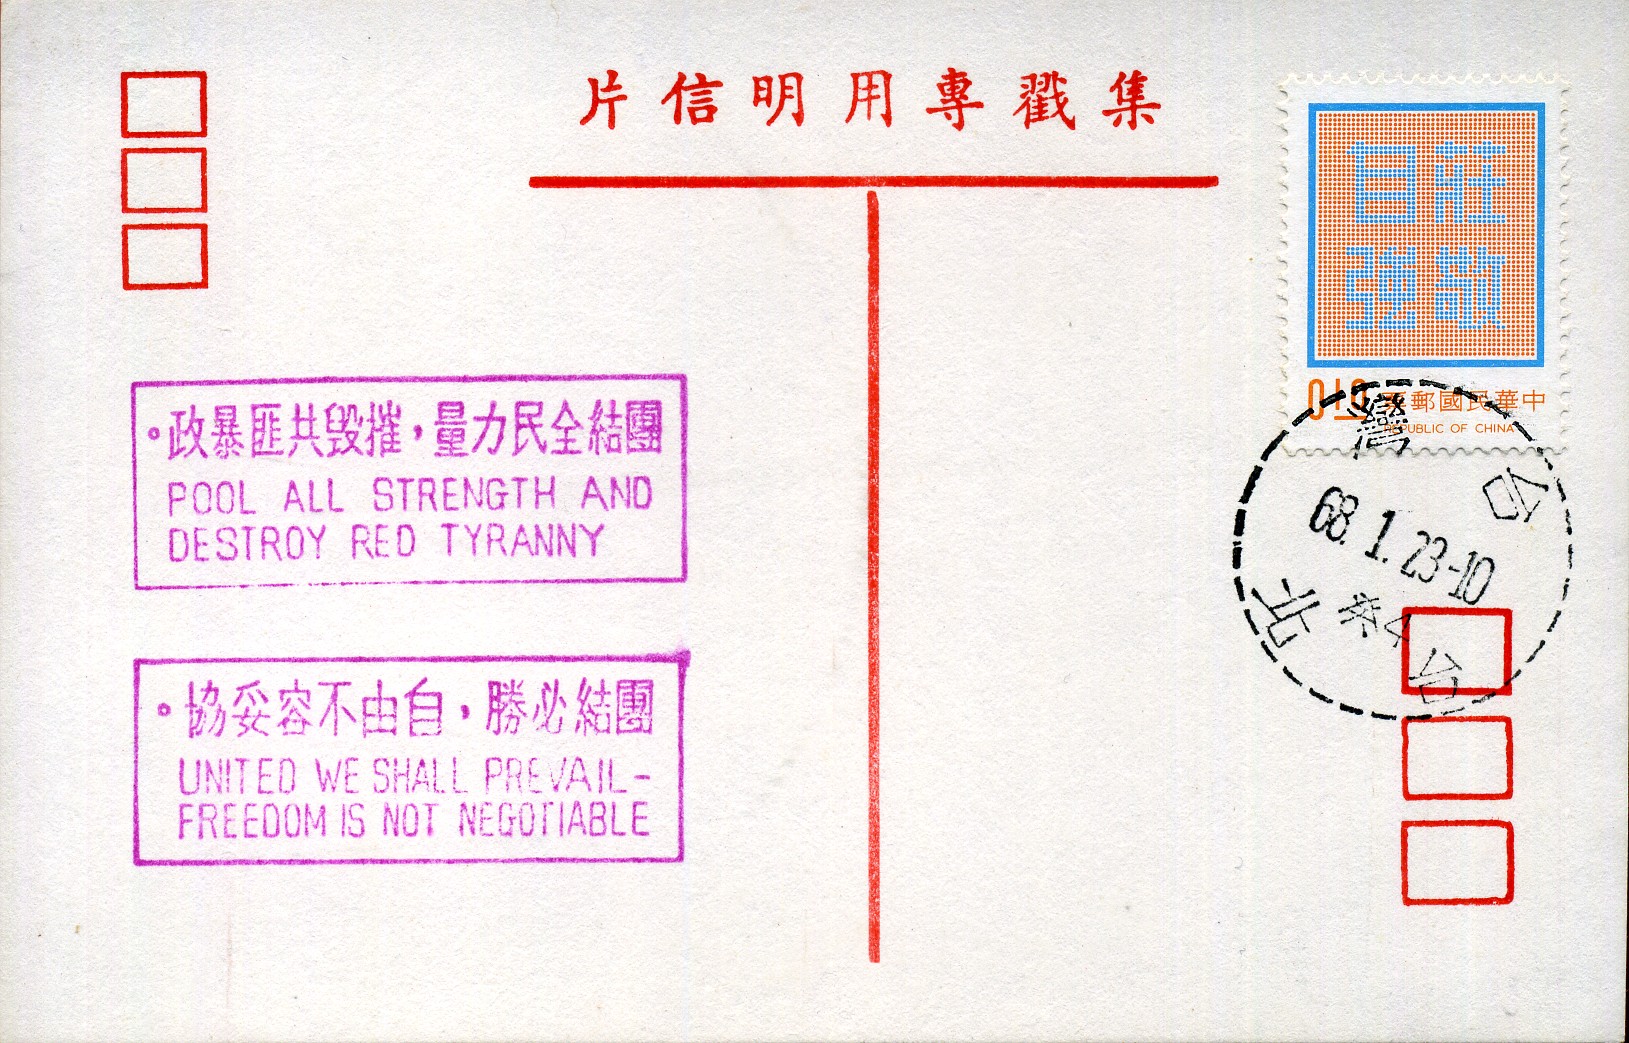 Pool all strength and destroy red tyranny - Handstempel – lila - Taipeh (?)